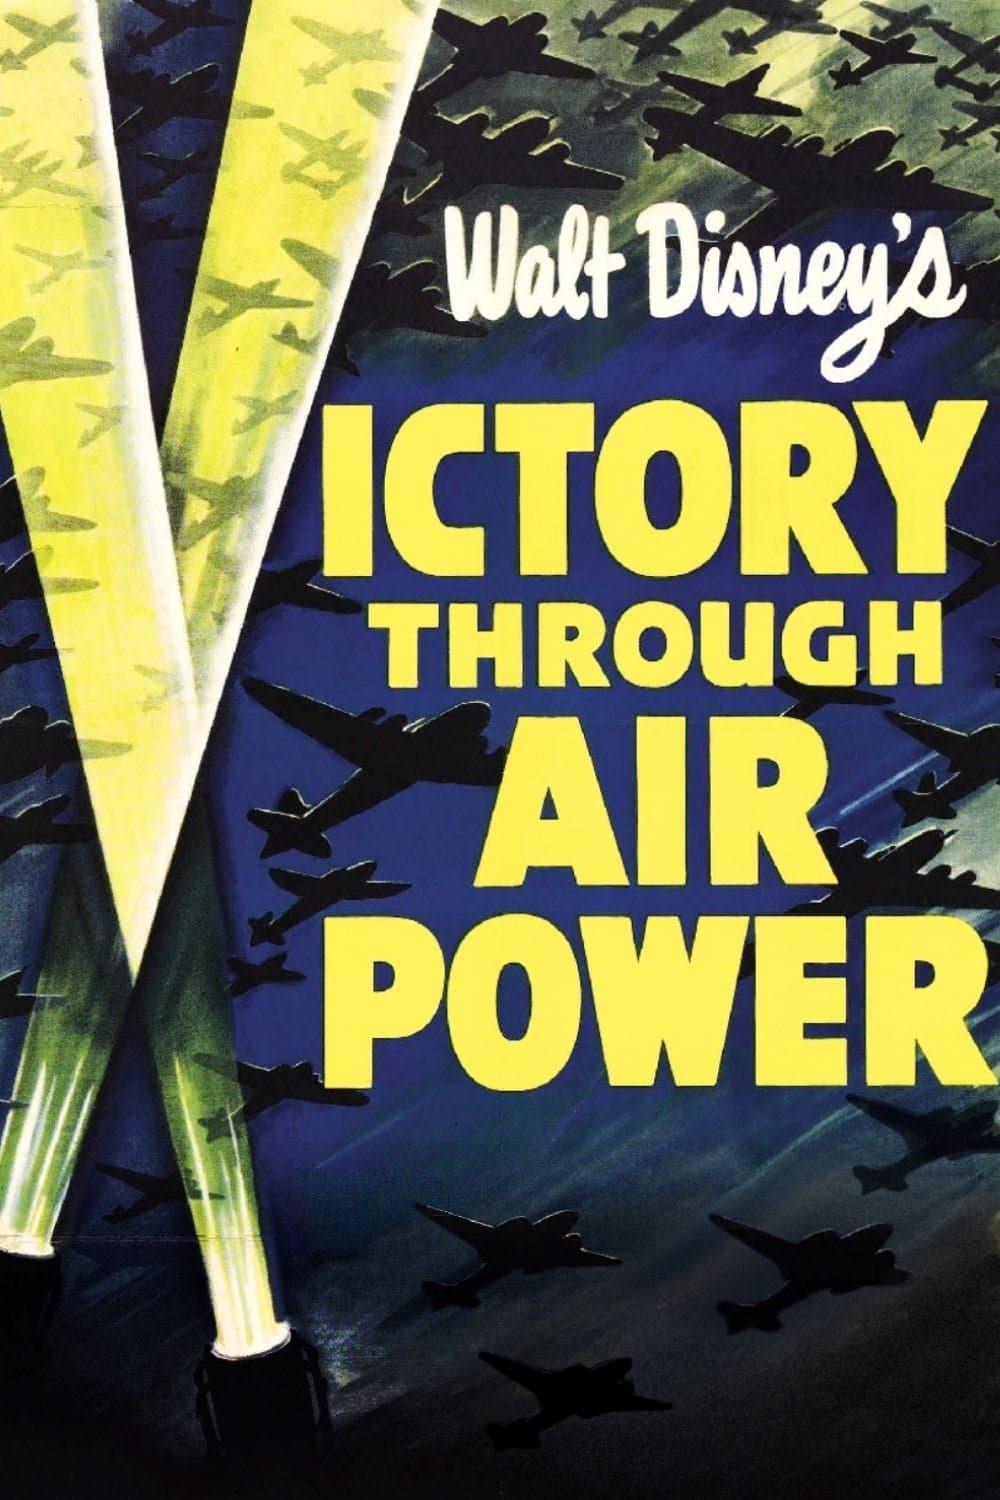 Victory Through Air Power poster